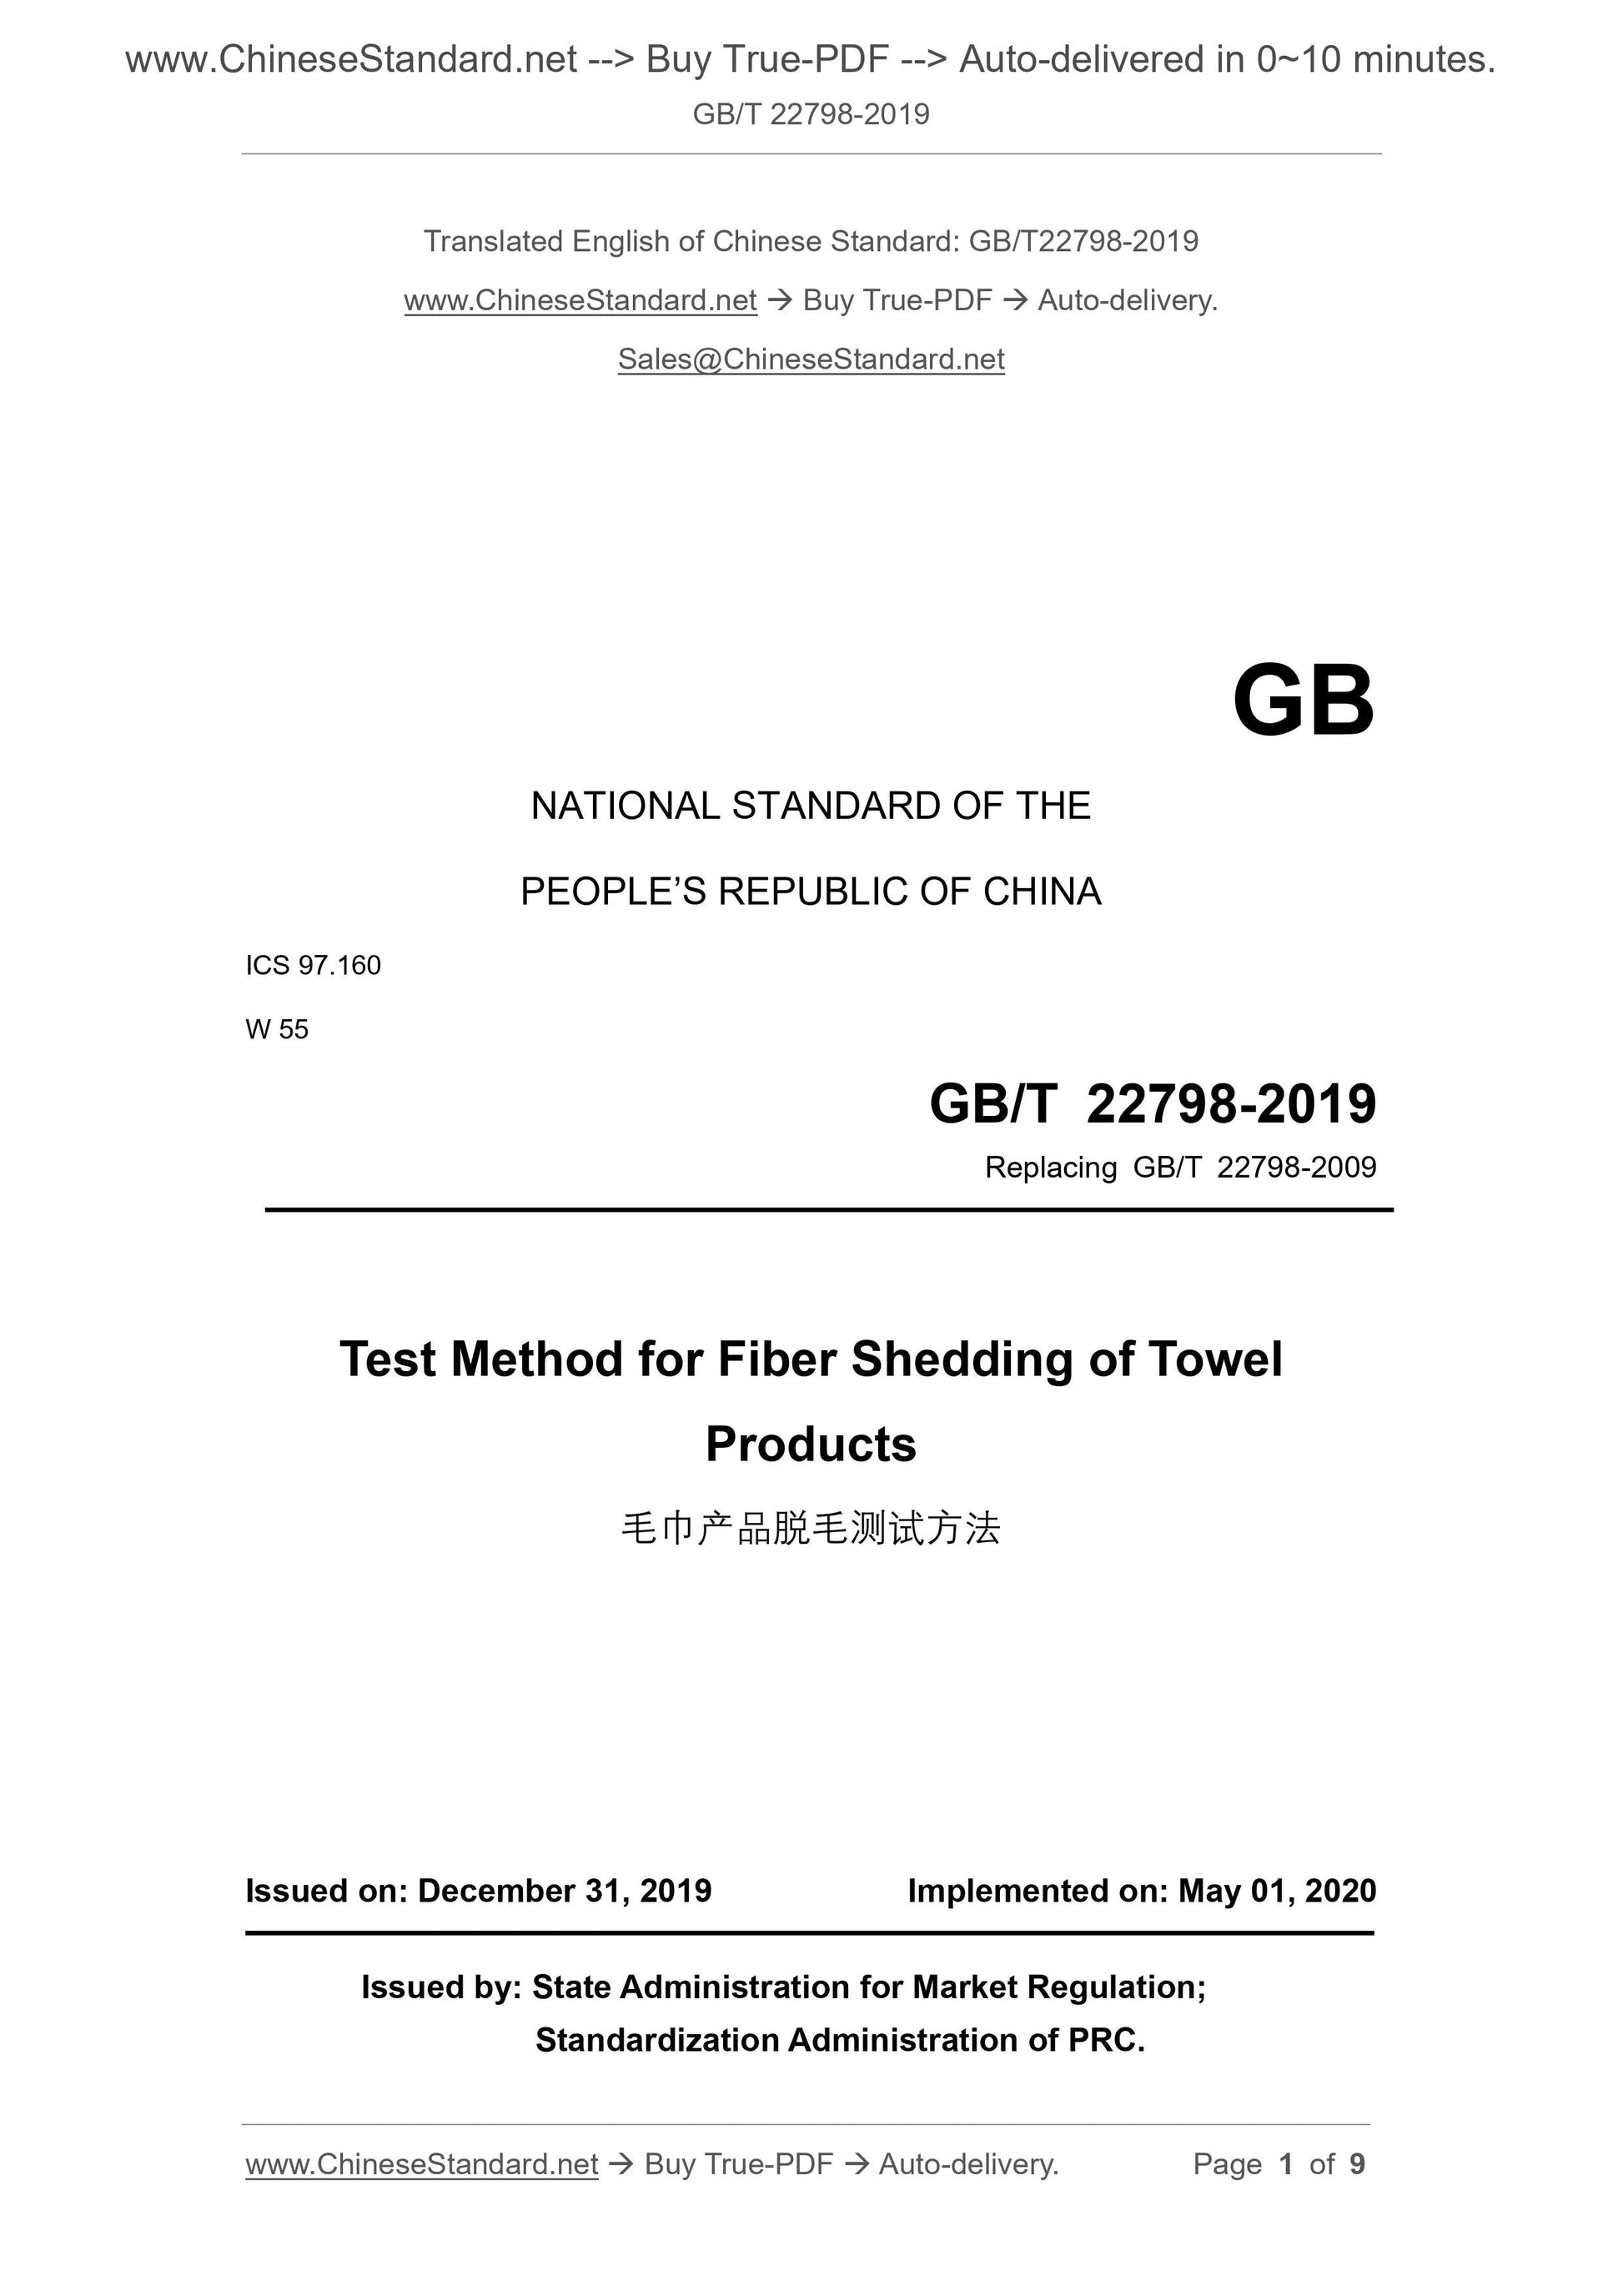 GB/T 22798-2019 Page 1